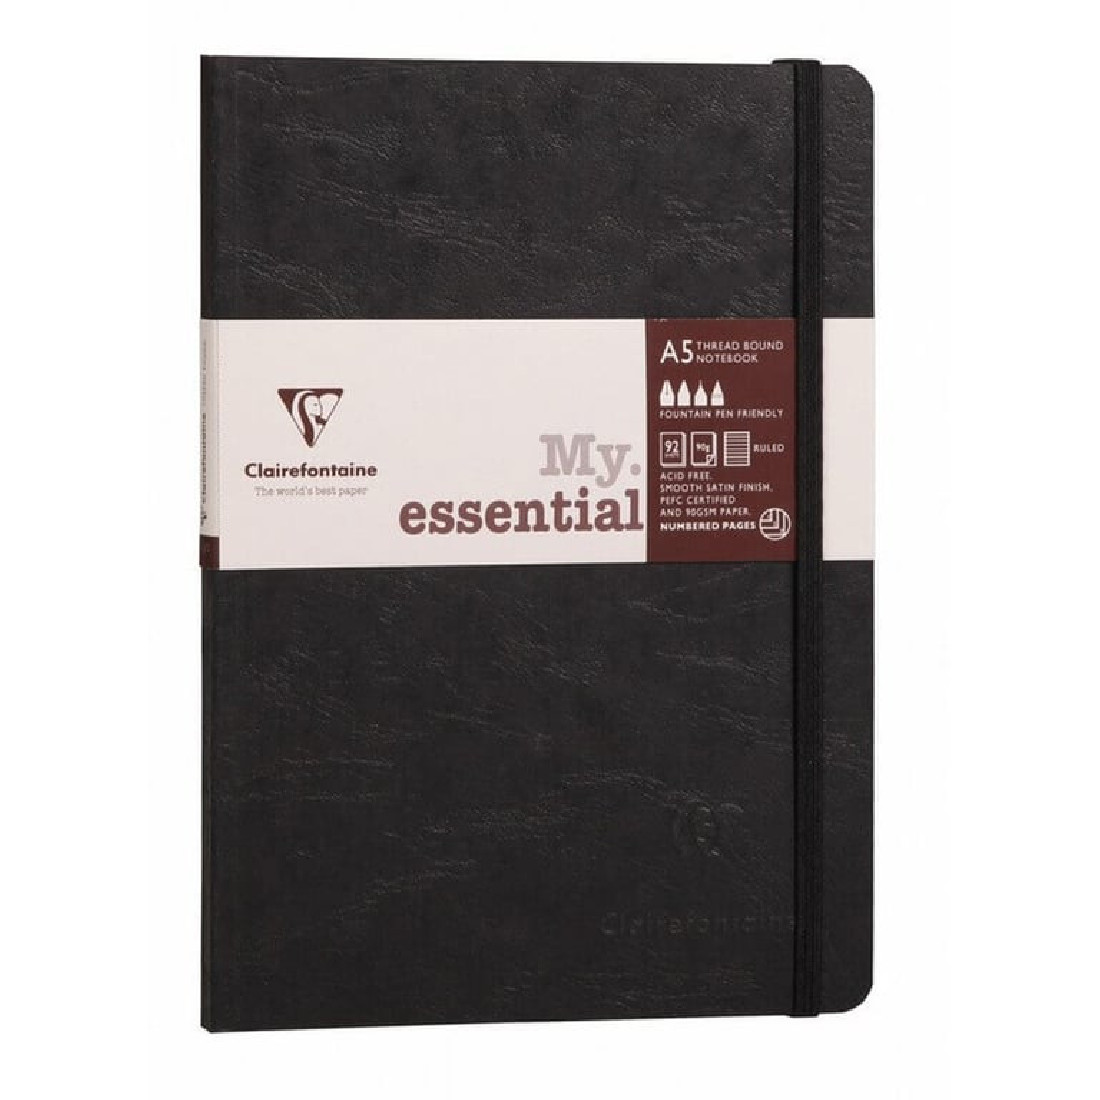 Clairefontaine A5 notebook My. essential, Lined, Black, soft cover, 192 pages, 90g